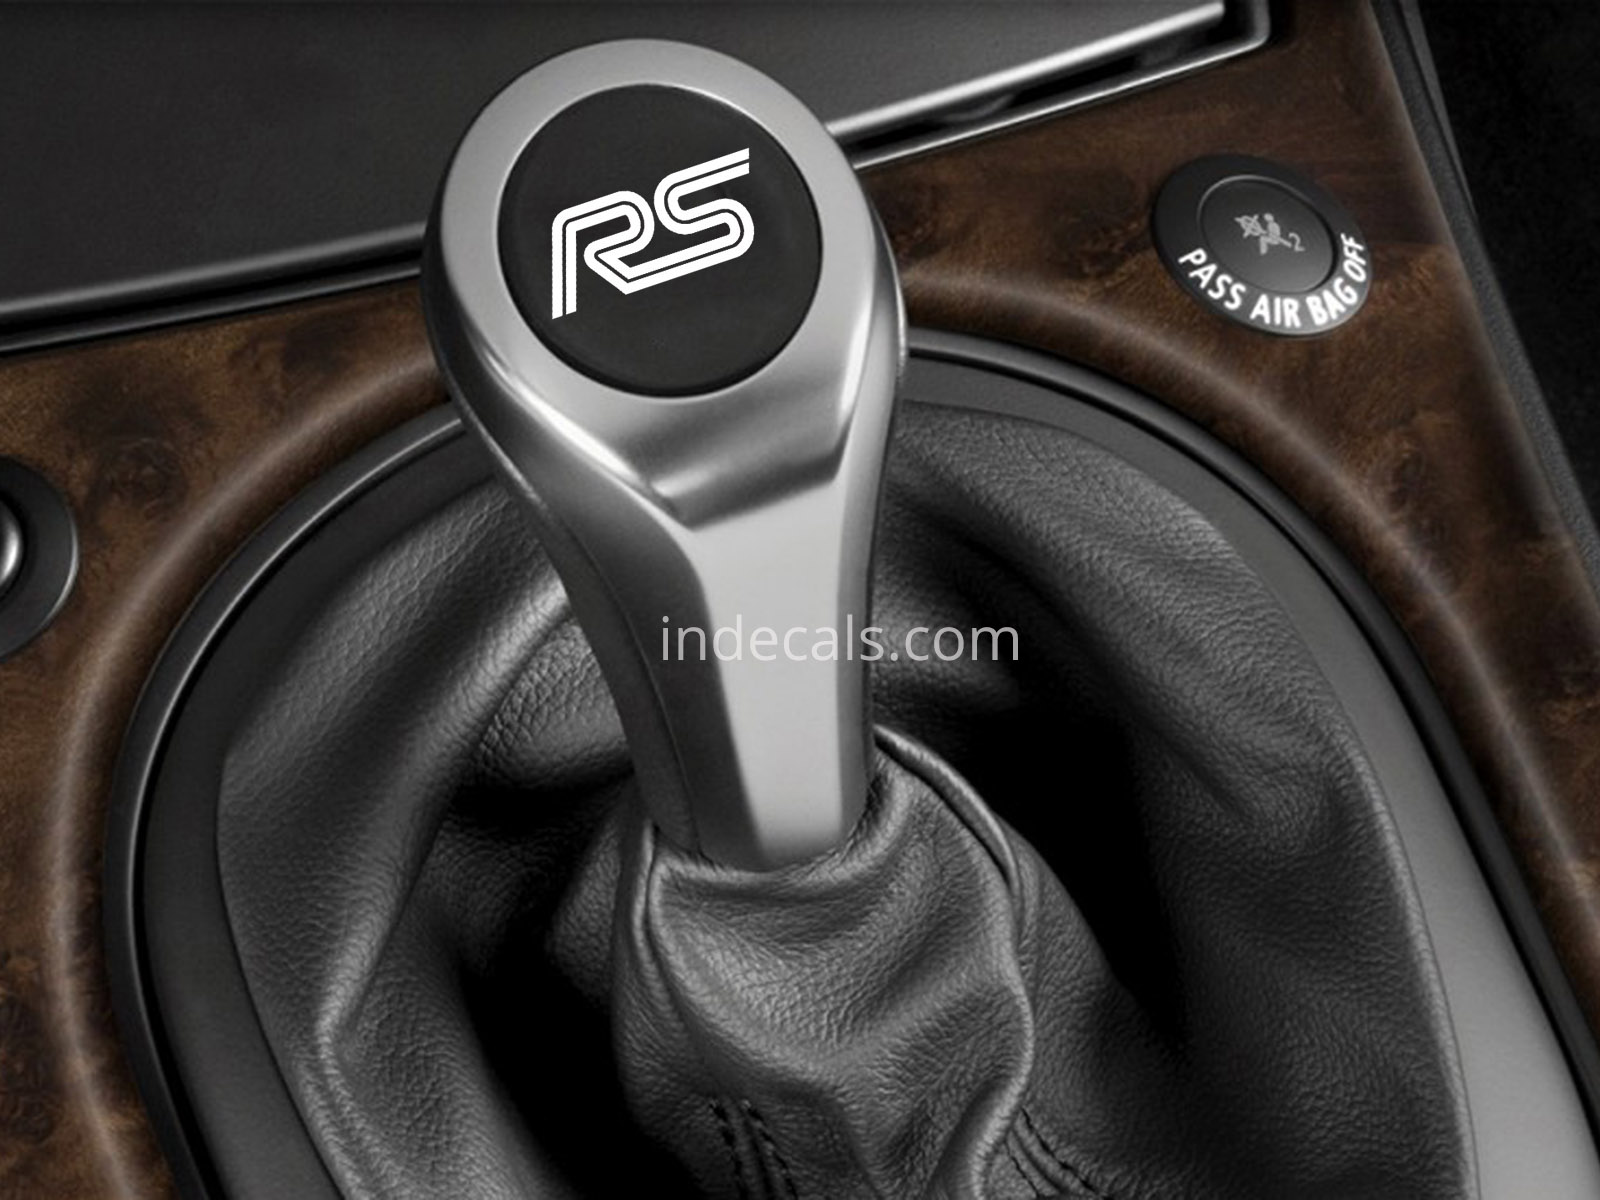 3 x Ford RS Stickers for Gear Knob - White